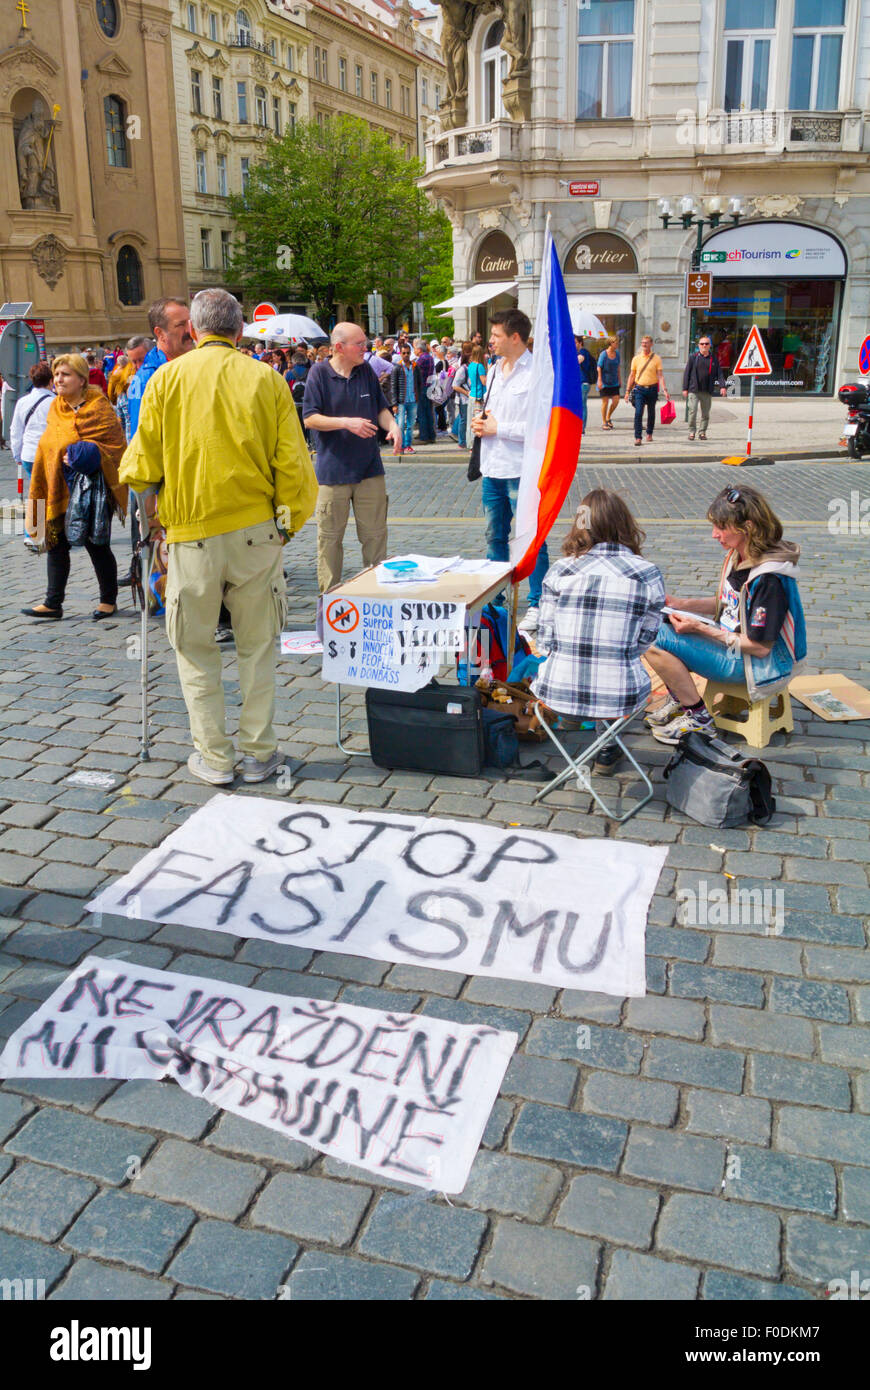 Pro-Russian anti-Fascist information booth, old town square, Prague, Czech Republic, Europe Stock Photo